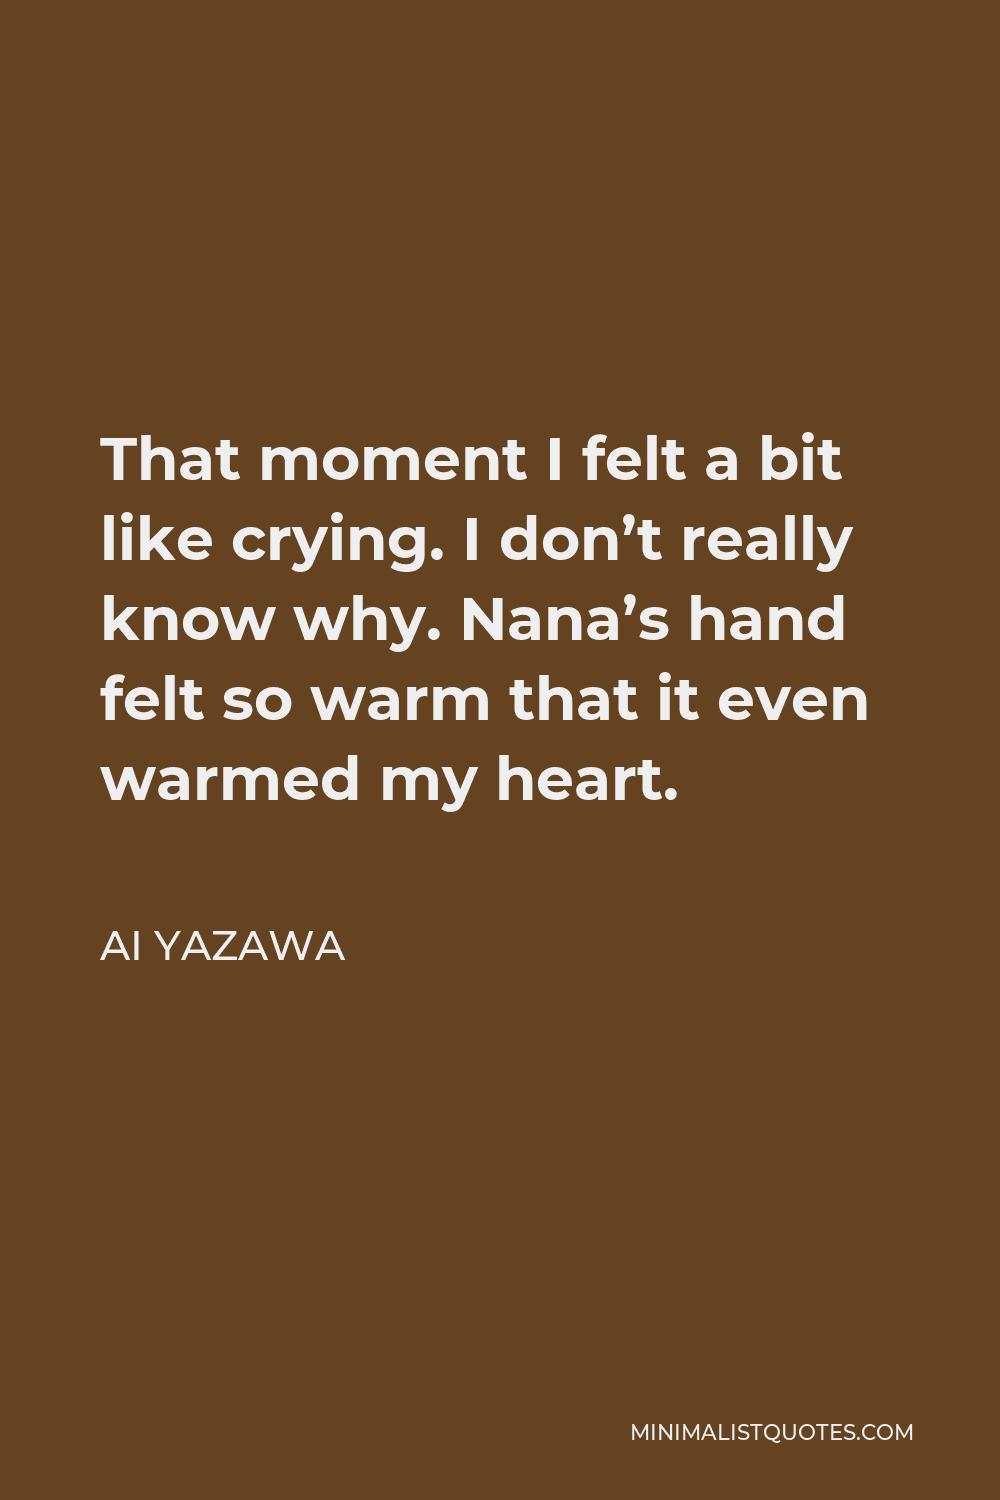 Ai Yazawa Quote - That moment I felt a bit like crying. I don’t really know why. Nana’s hand felt so warm that it even warmed my heart.